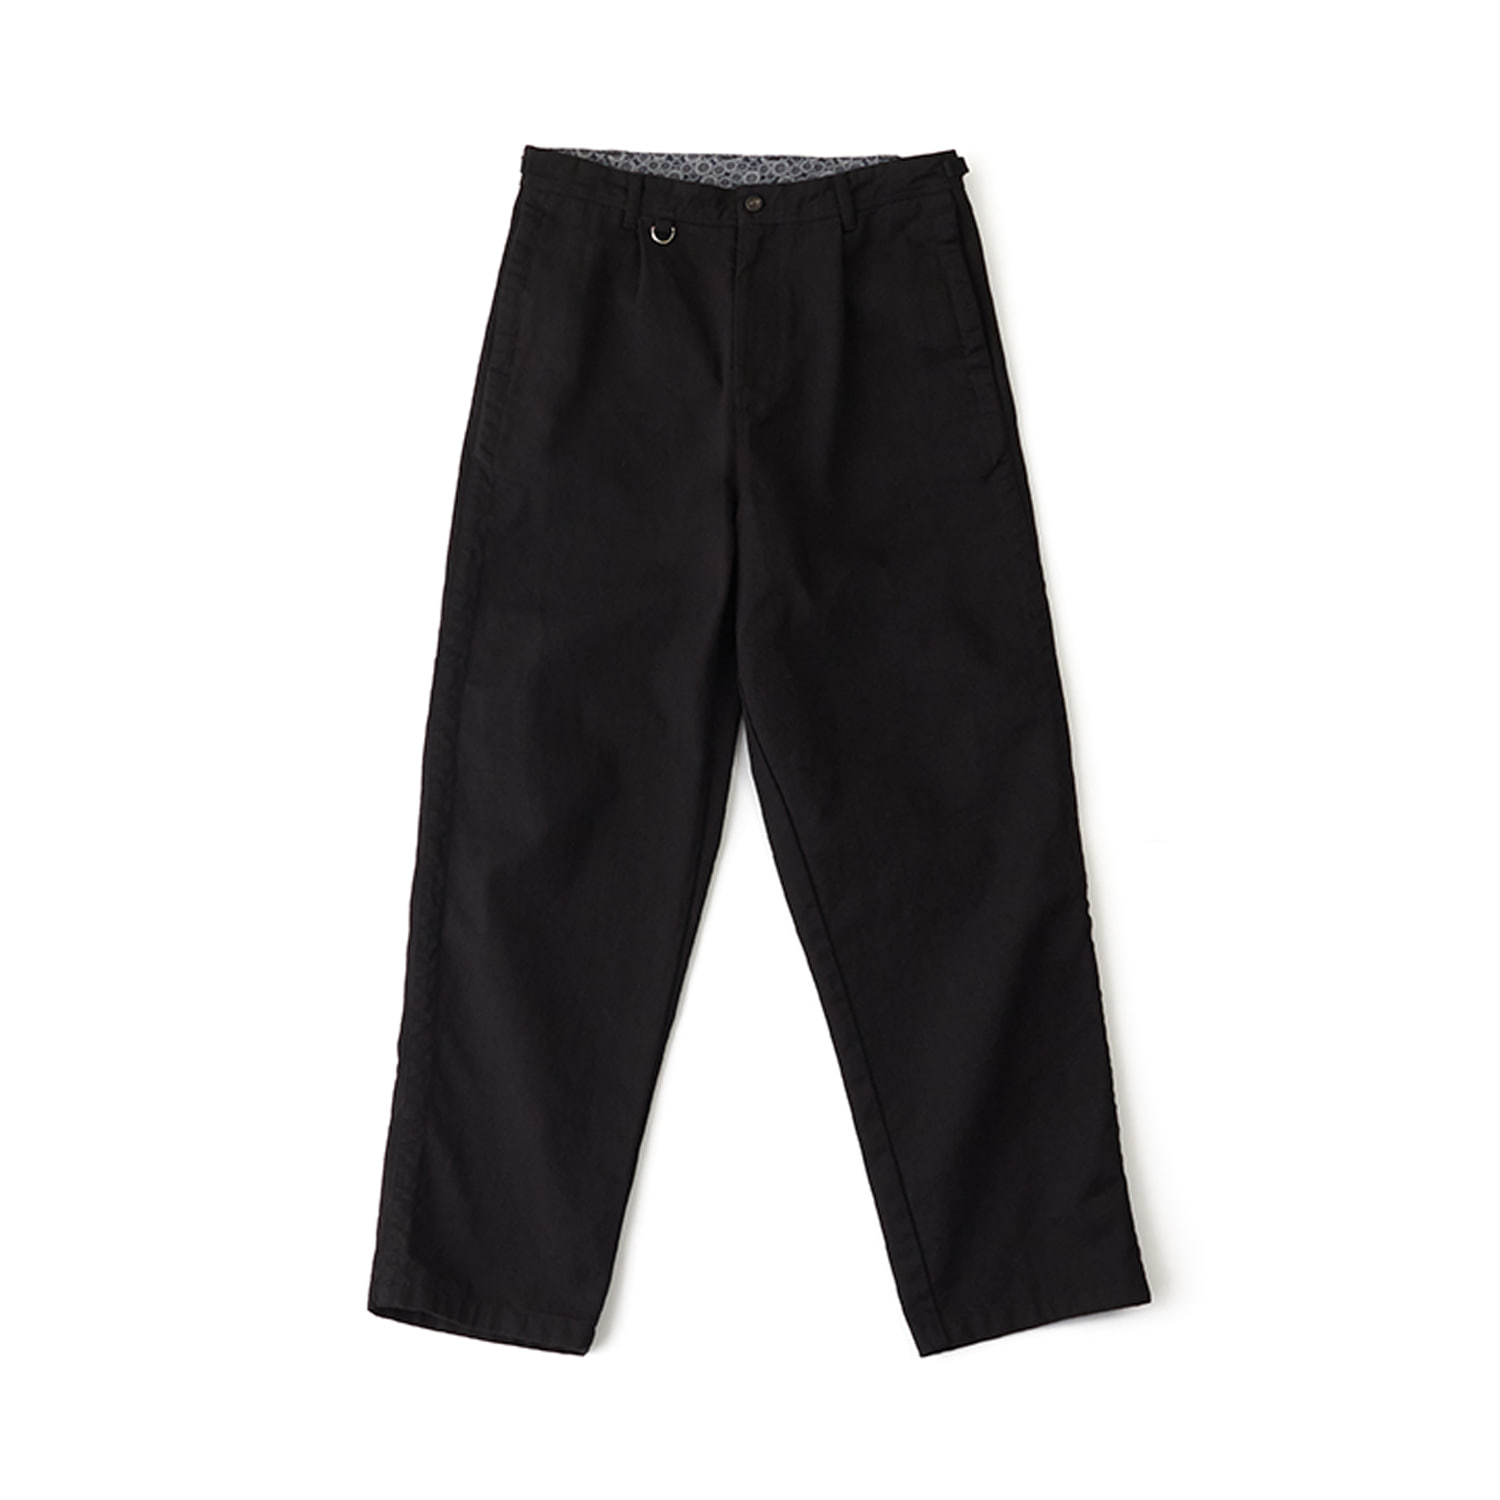 Usual Belted Pants Black